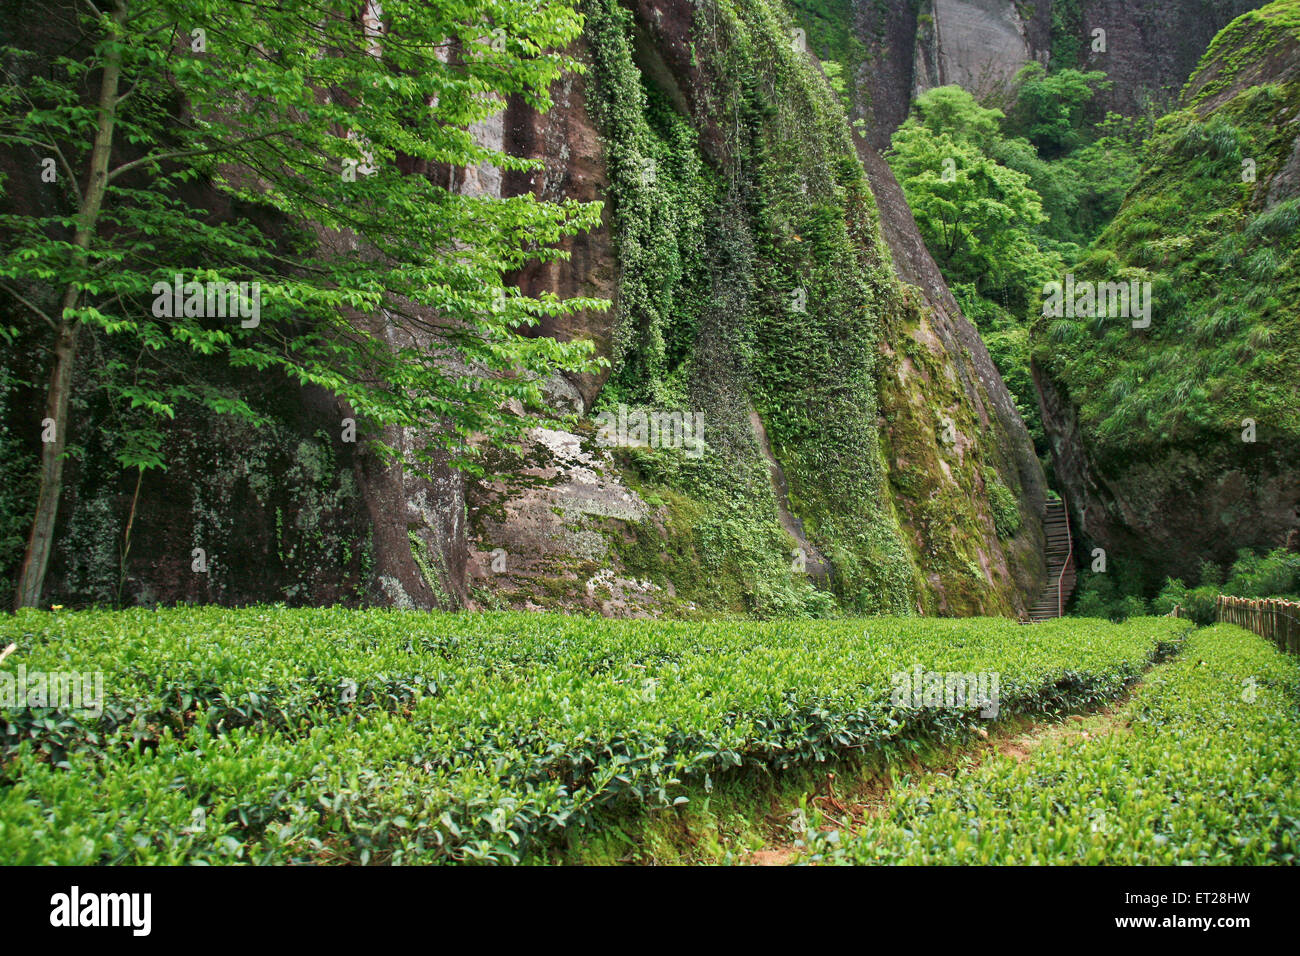 Hong Pao tea - the most expensive tea in the world. Stock Photo